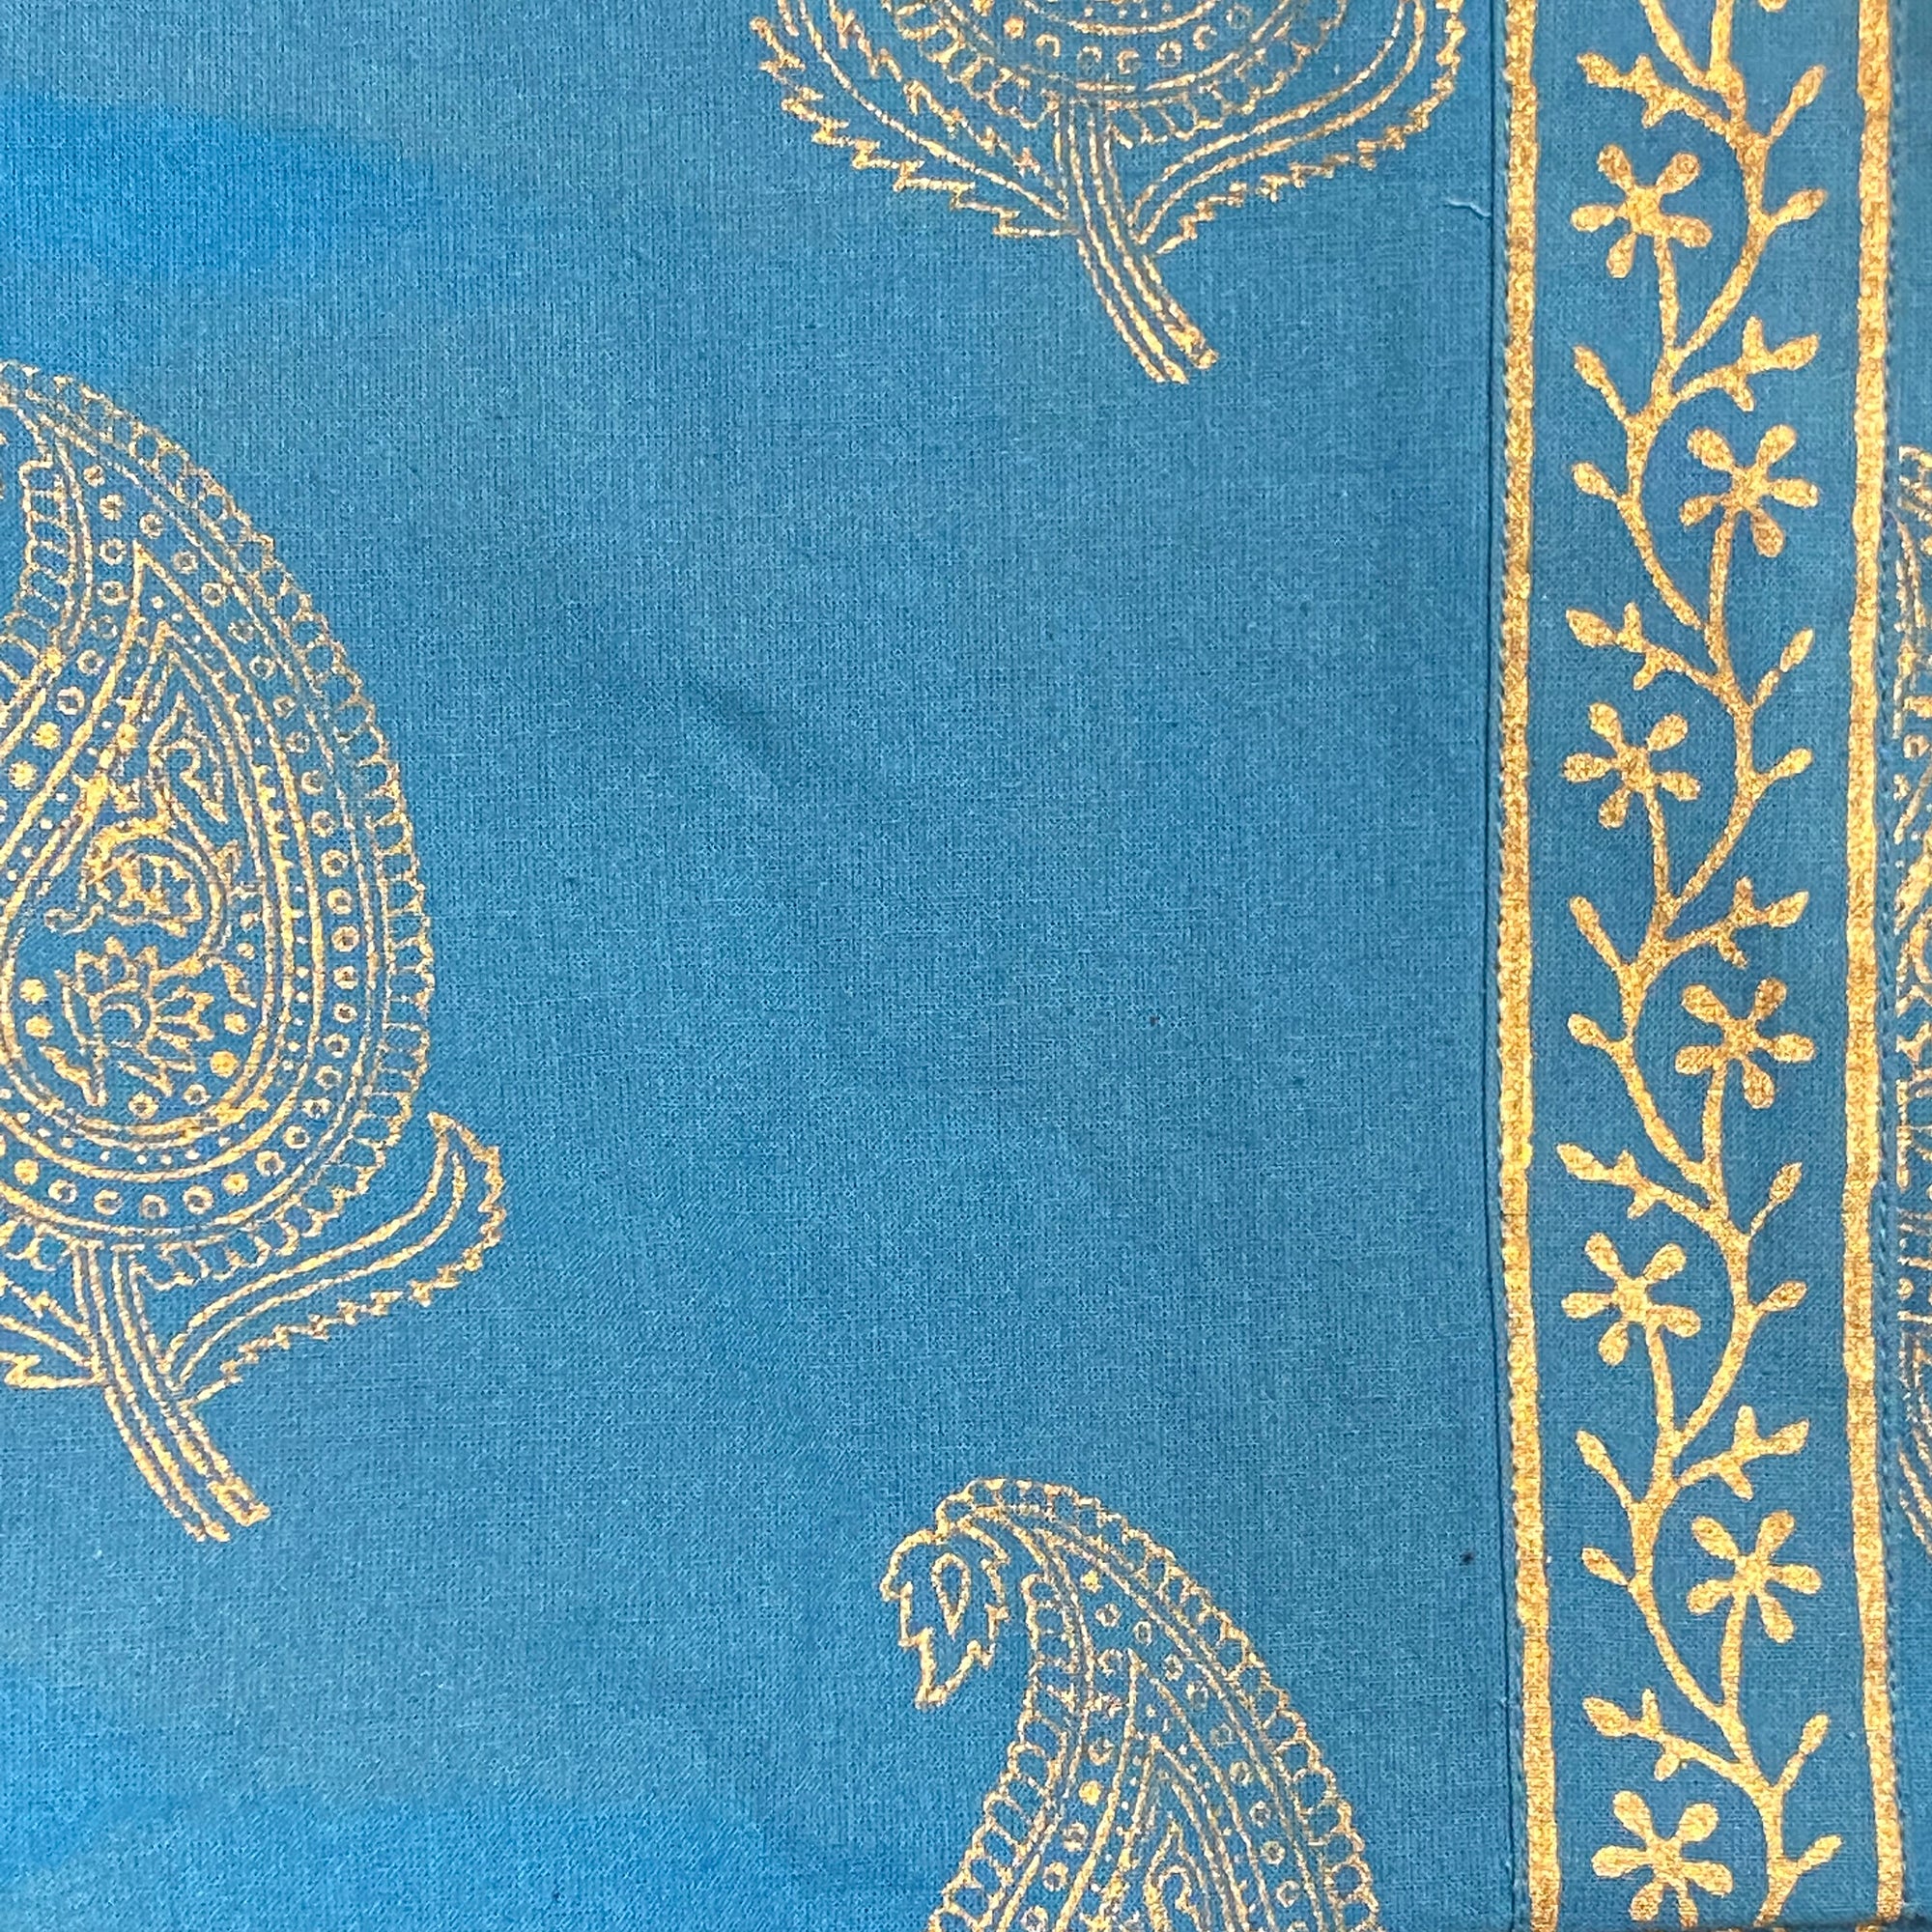 Bolster Covers - Vintage India NYC